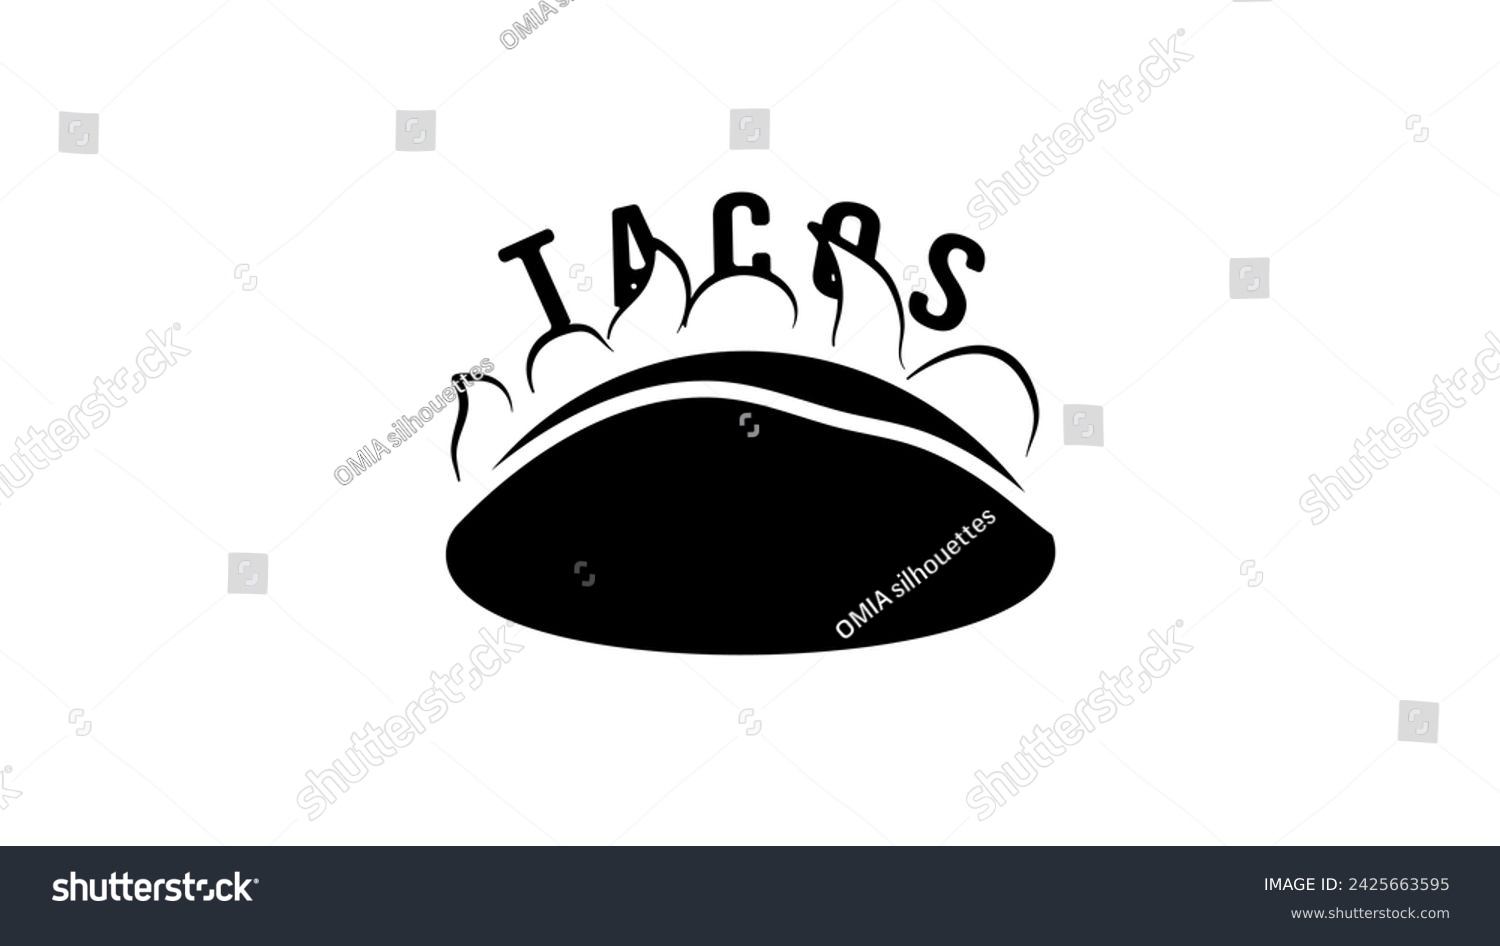 SVG of Tacos mexican fast food sign, black isolated silhouette svg